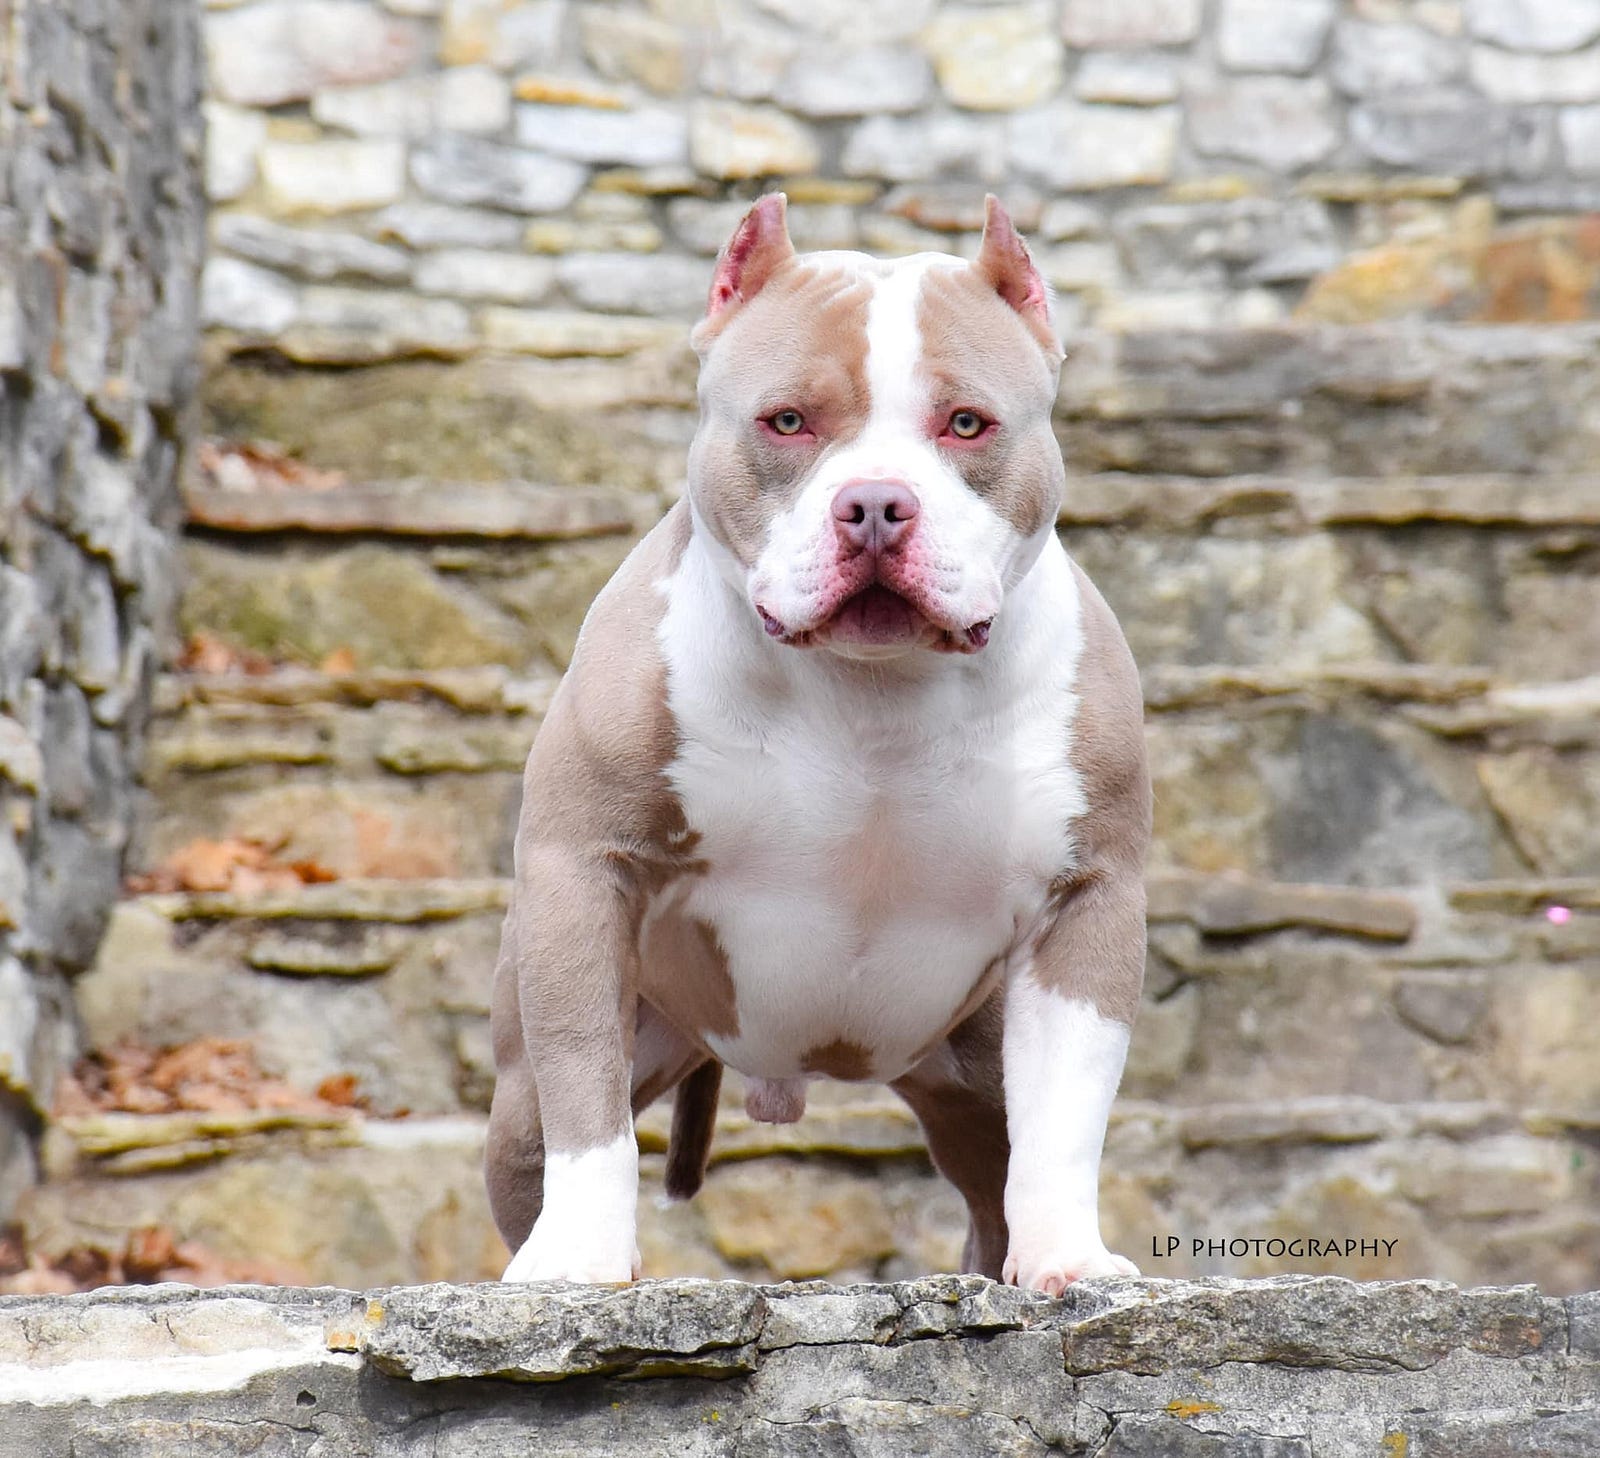 Cesar our lilac tri pocket bully stud ready to work and proven  🌈💯👌🔥🇬🇧🐶